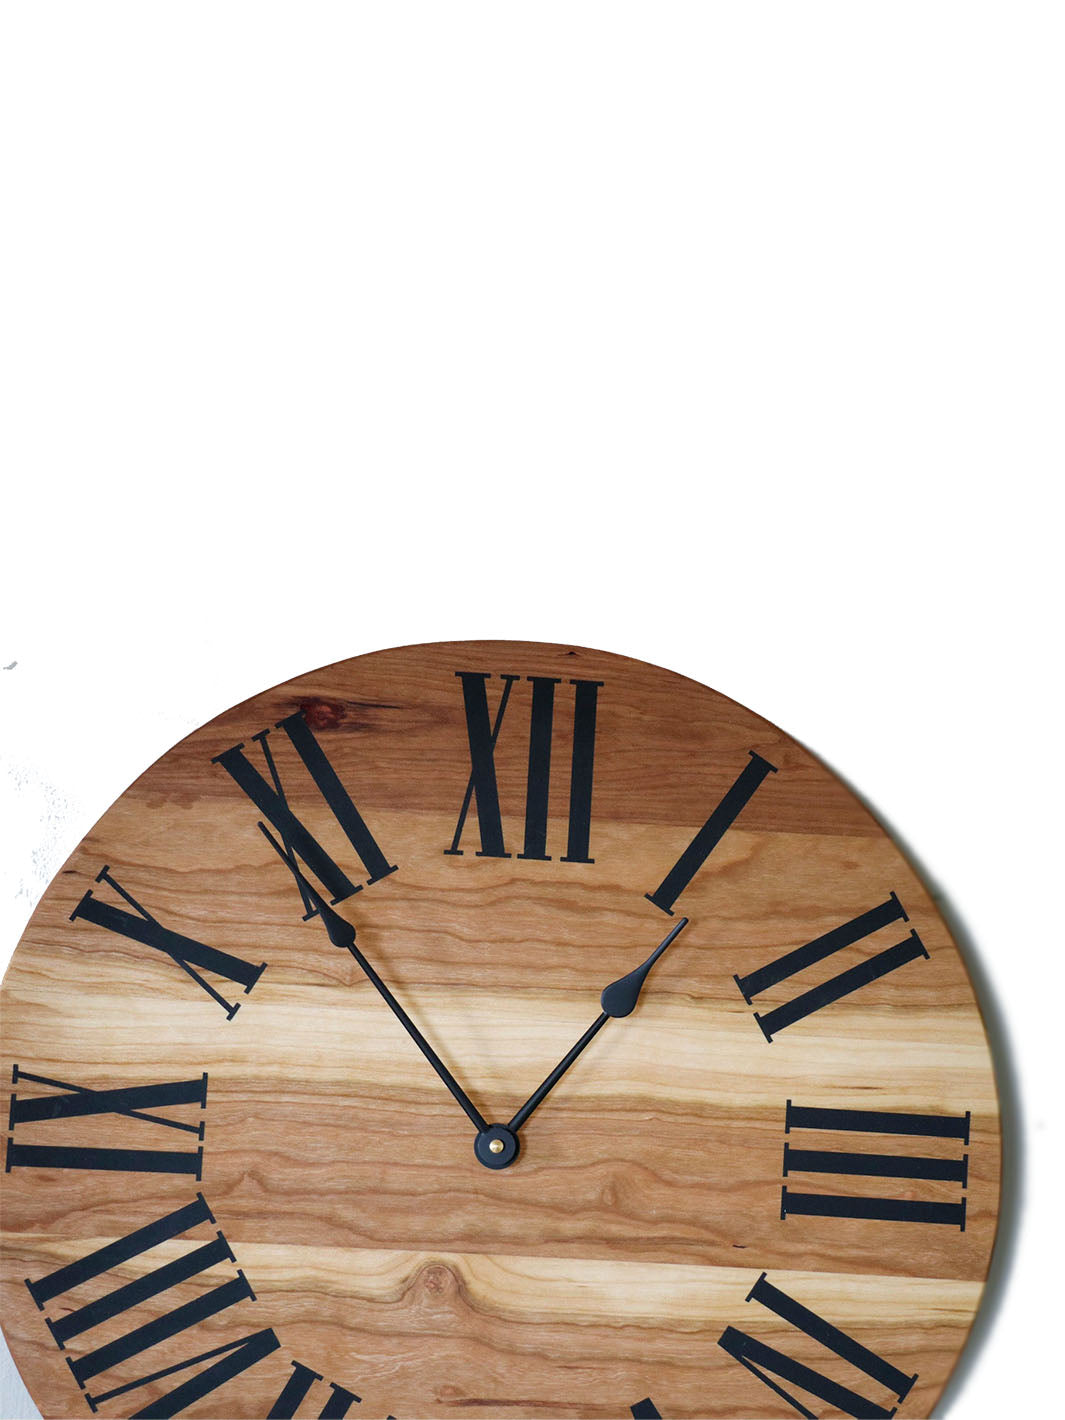 Sappy 18" Solid Cherry Hardwood Wall Clock with Black Roman Numerals (in stock) Earthly Comfort Clocks 2127-1